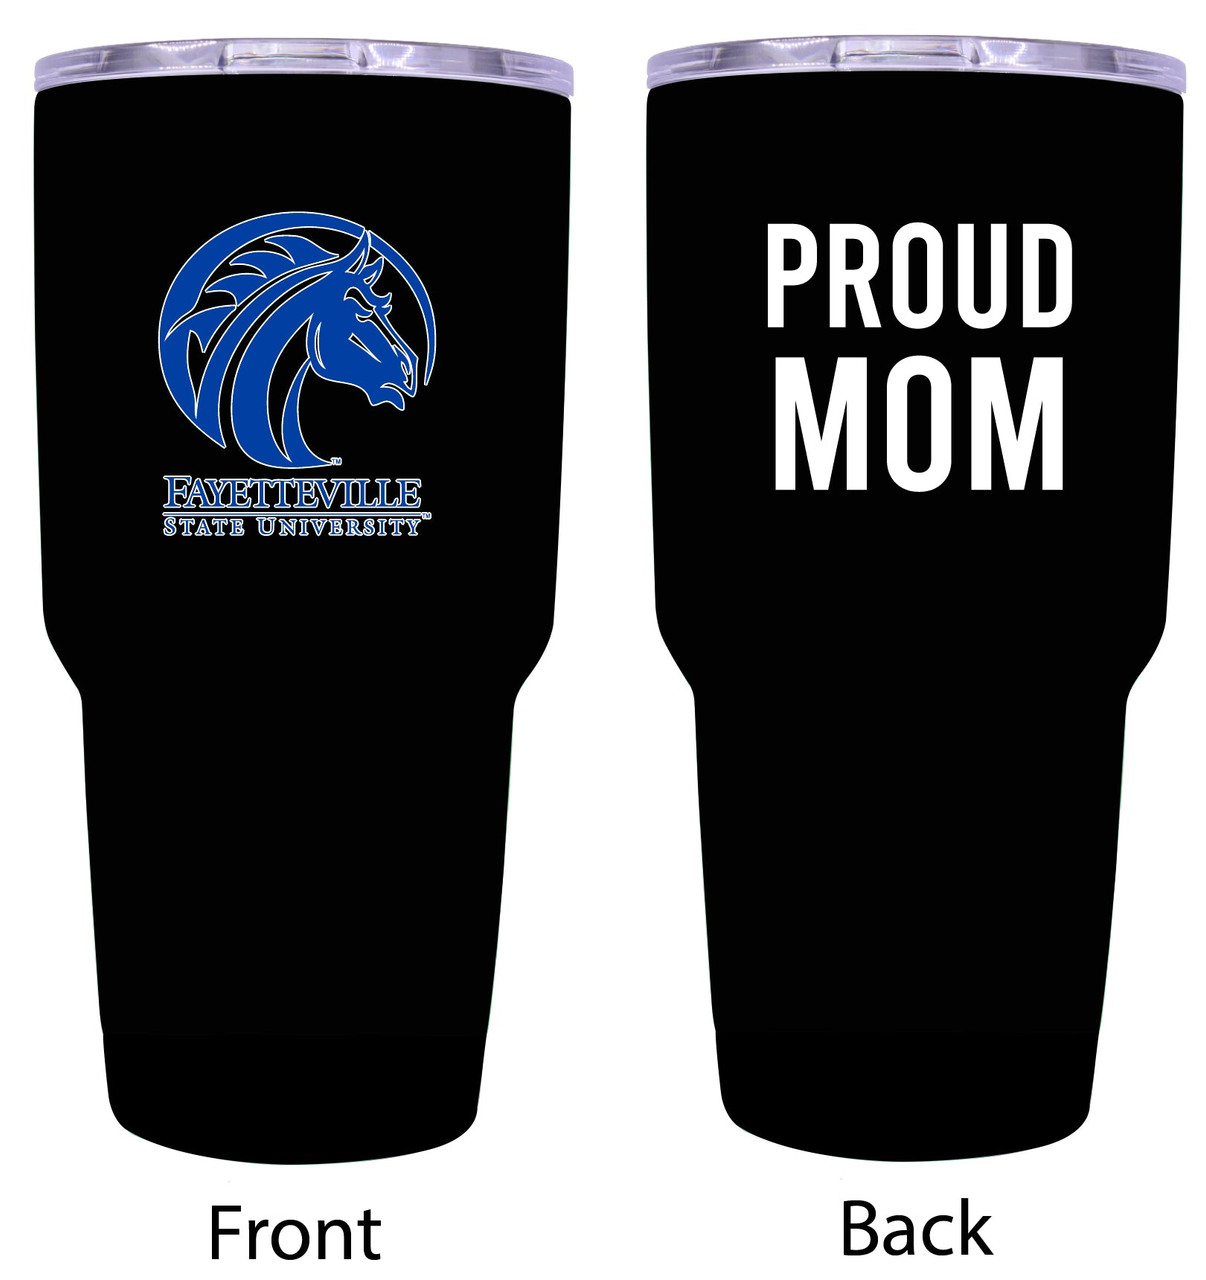 Fayetteville State University Proud Mom 24 oz Insulated Stainless Steel Tumblers Black.